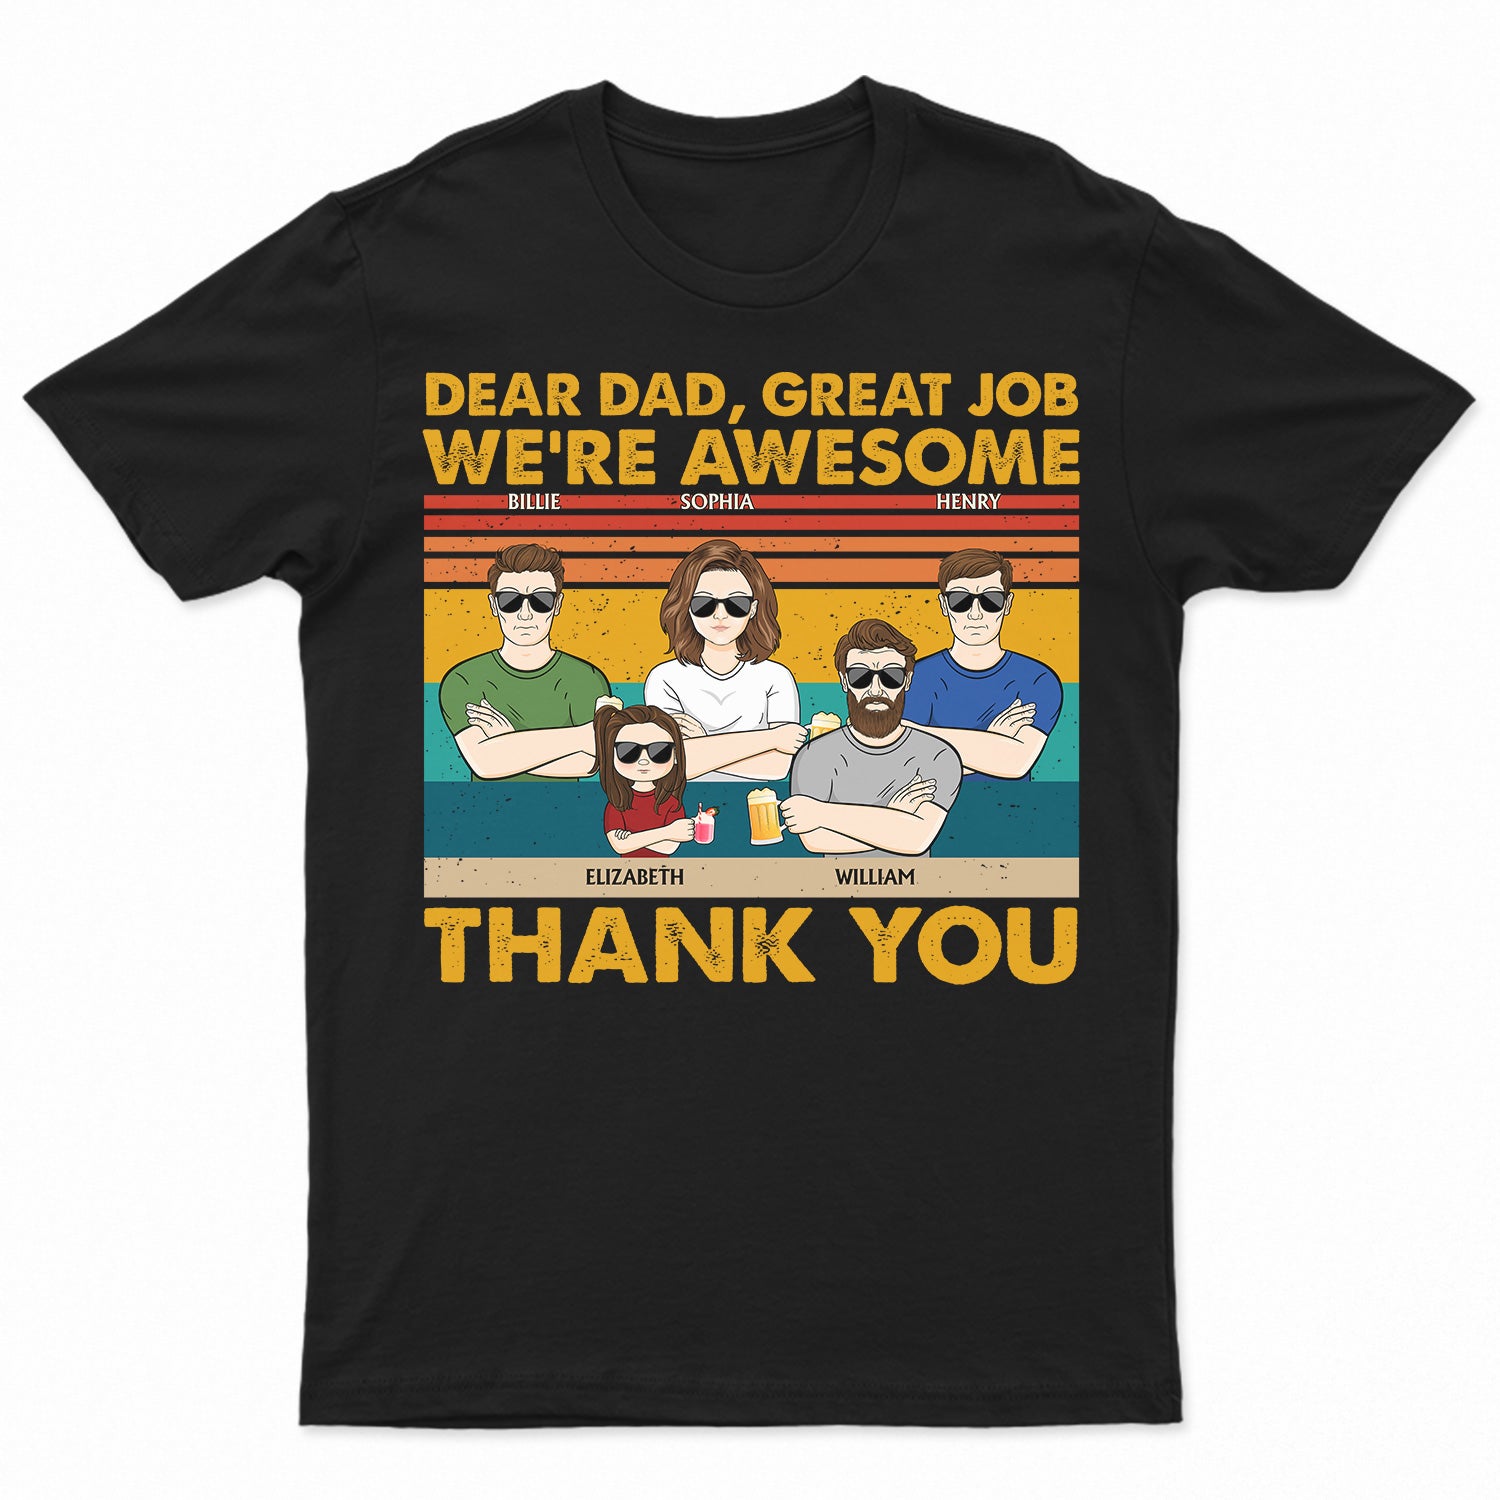 Dear Dad Great Job We're Awesome Thank You Kids & Adult - Funny, Birthday Gift For Father, Husband - Personalized Custom T Shirt